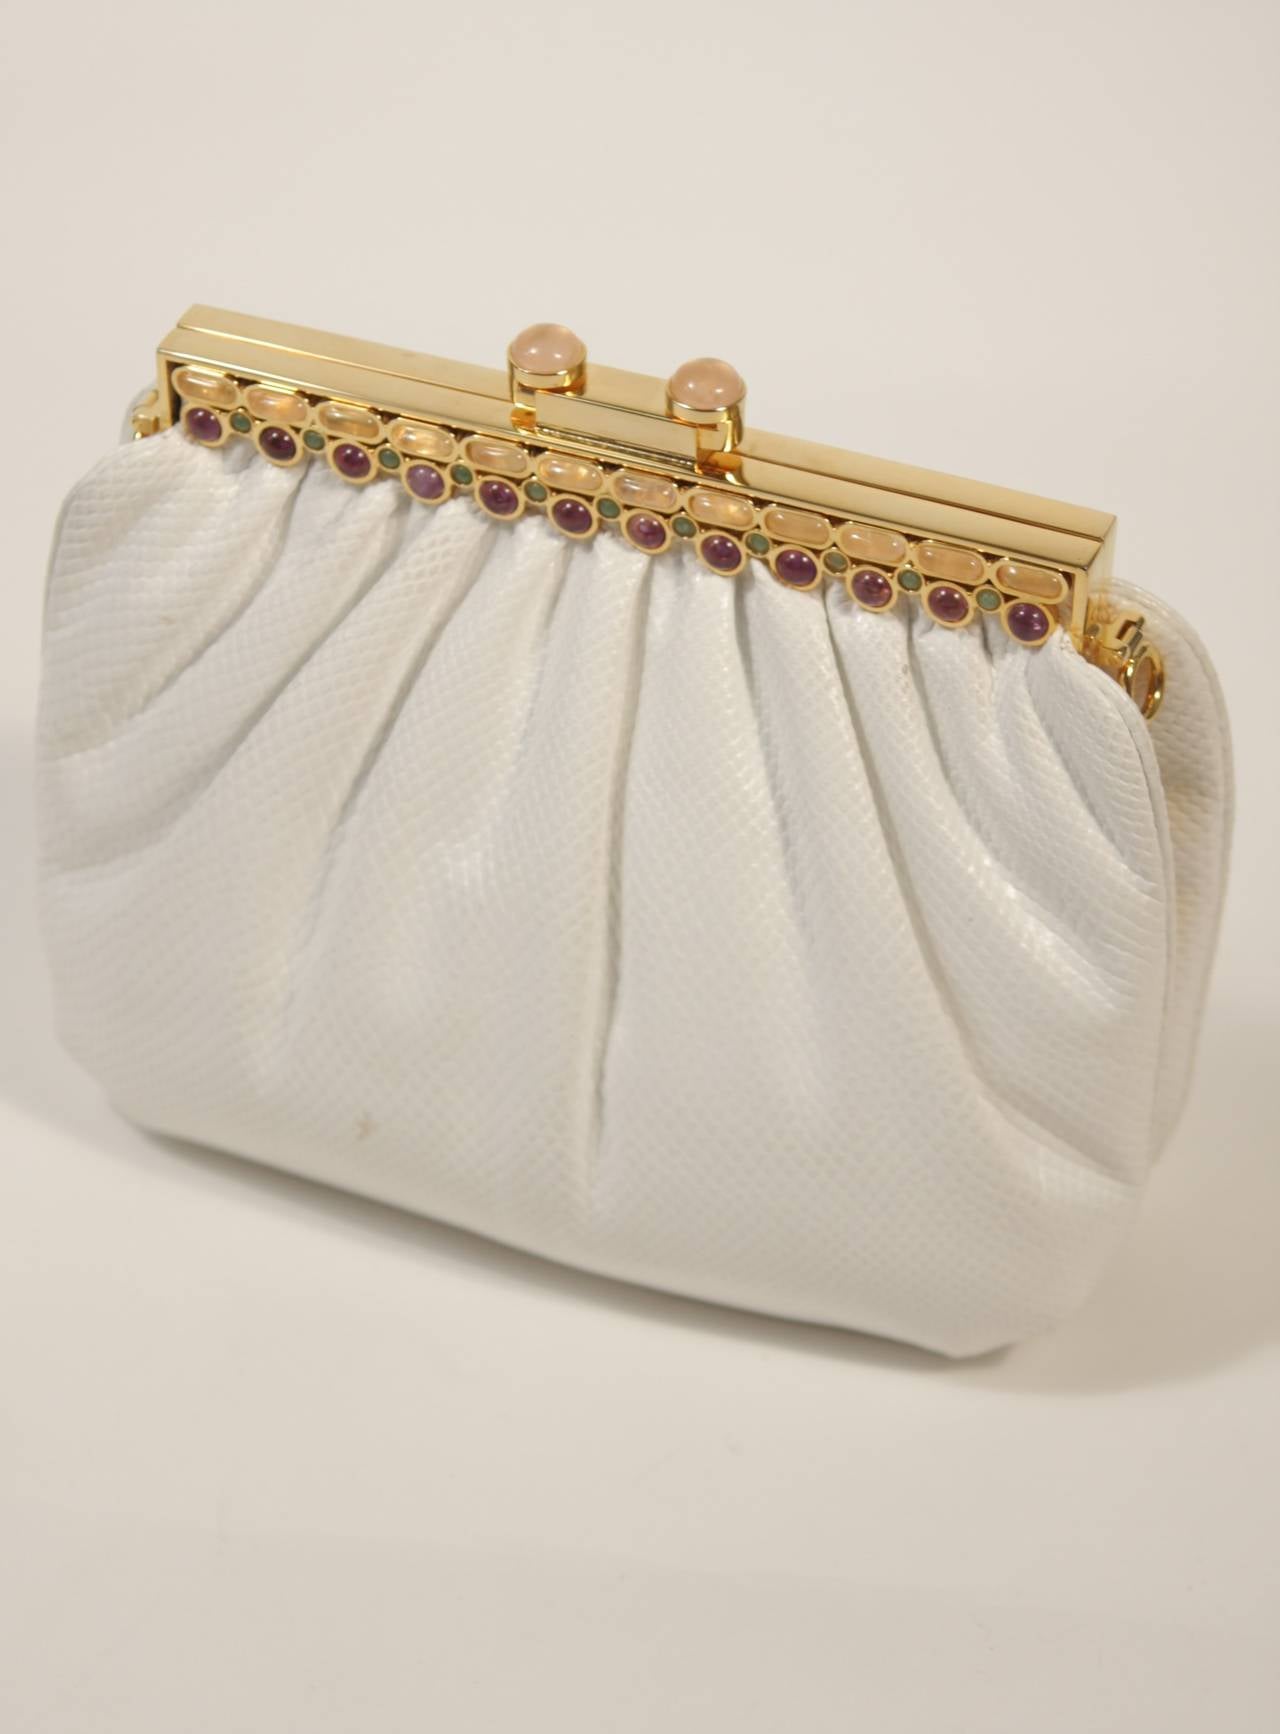 Judith Leiber Gathered White Lizard Purse with Multi-Stone Gold Frame 3